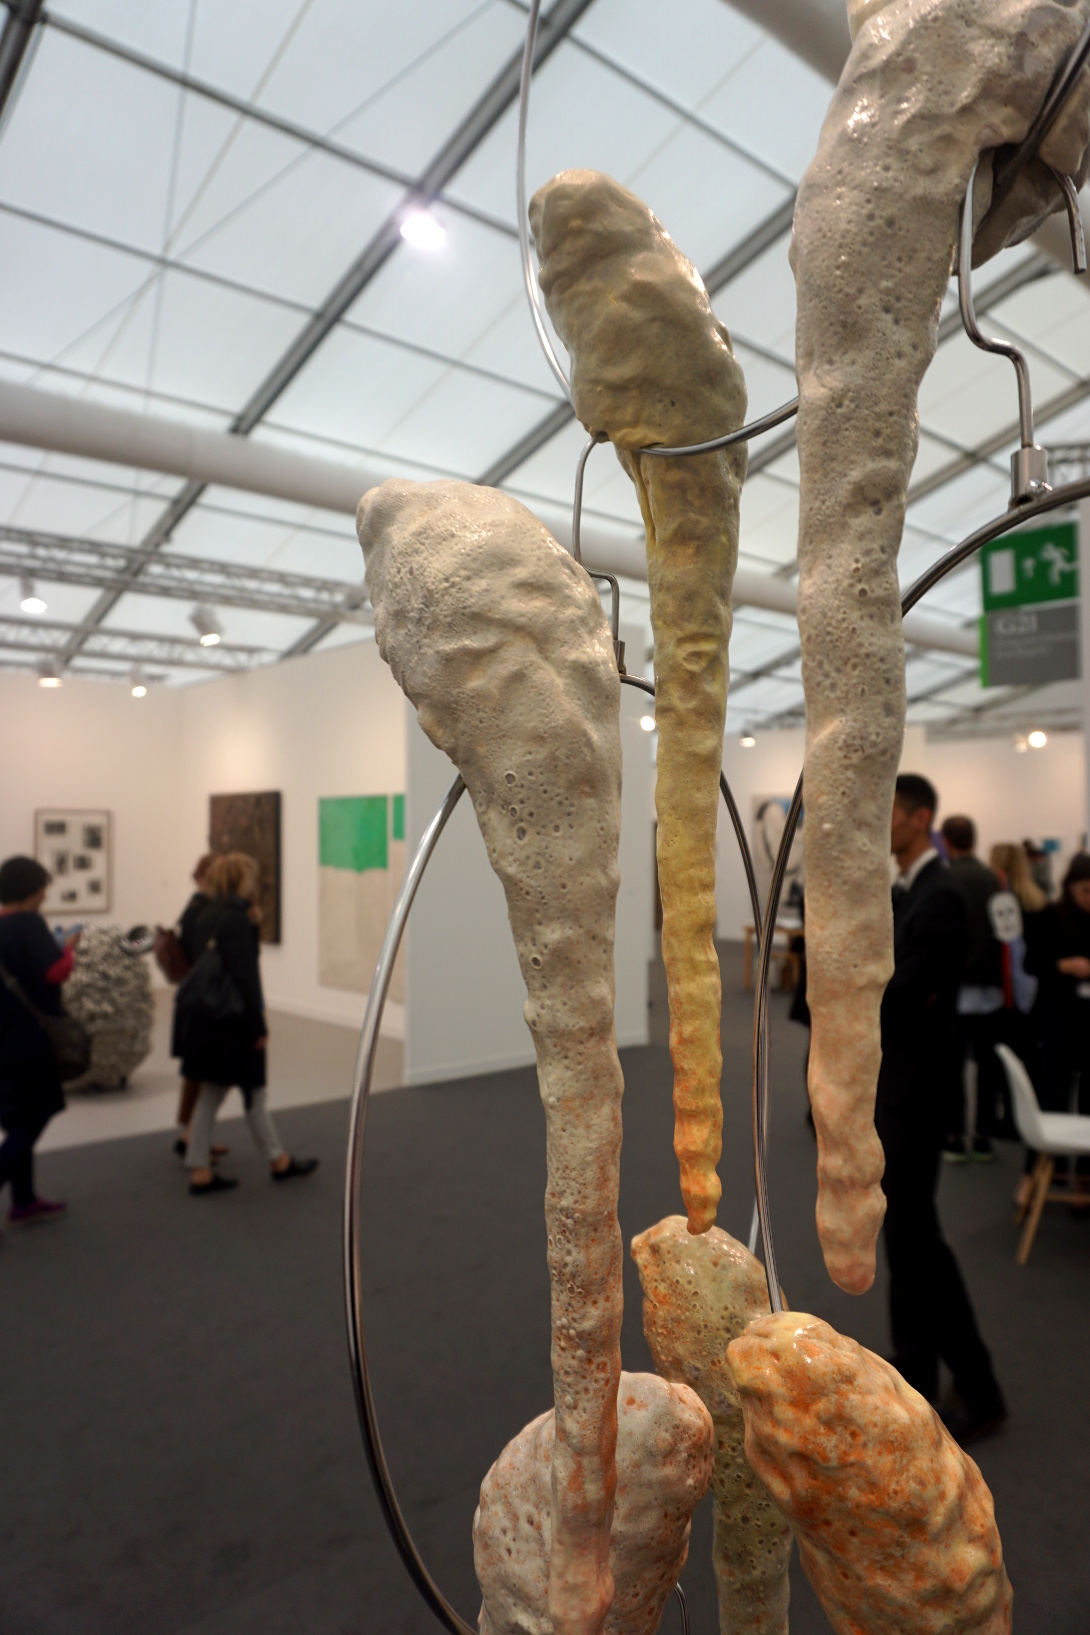 Untitled (2017) by Kathleen Ryan, Shio Kusaka's works at the Ghebaly Gallery, the Frieze Art Fair, London, 2017